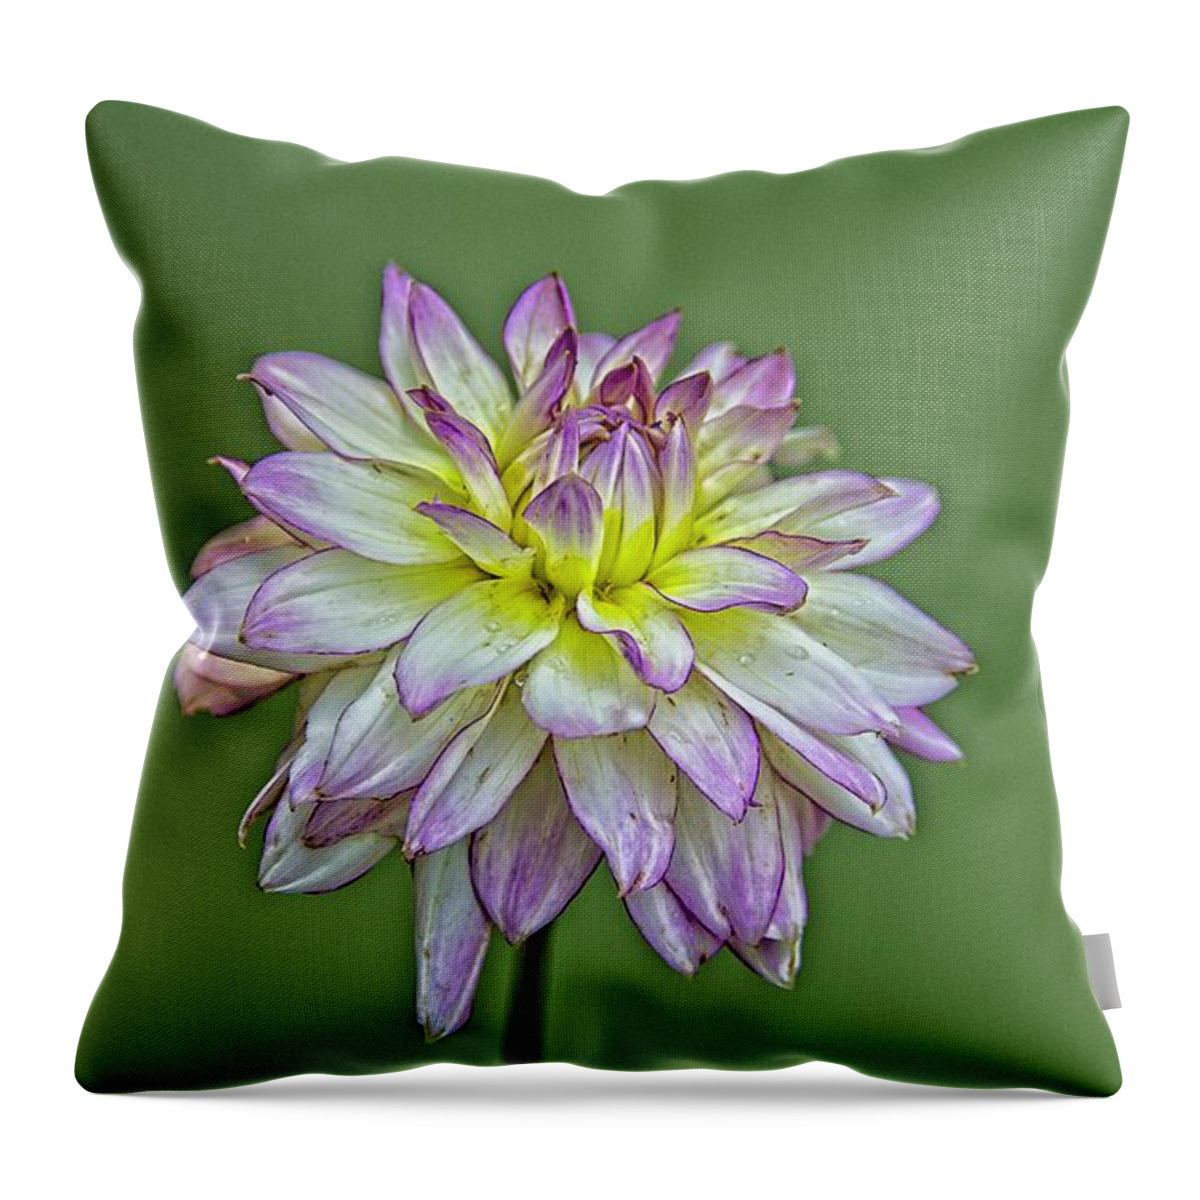 Flower Throw Pillow featuring the photograph Dahlia Delight by Allen Nice-Webb